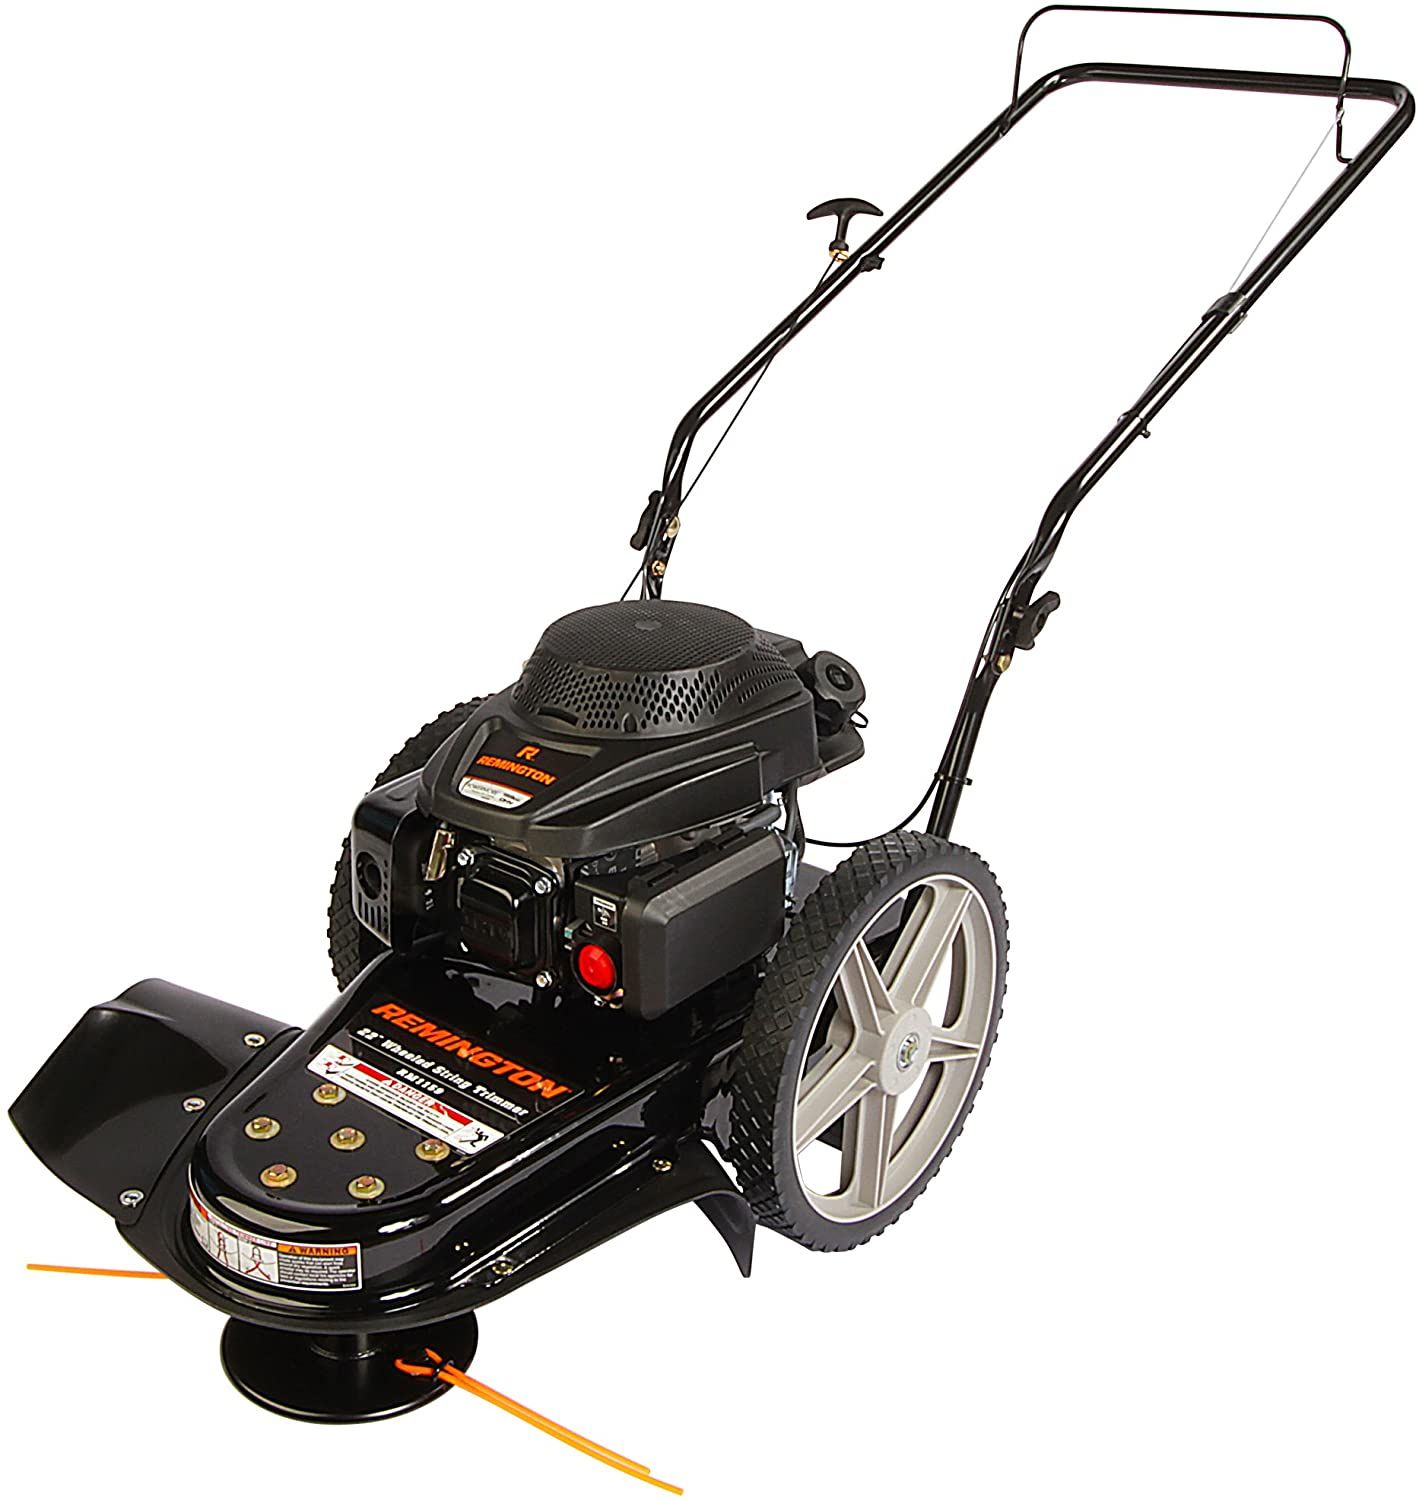 Remington RM1159 High Wheeled String Trimmer - $$title$$